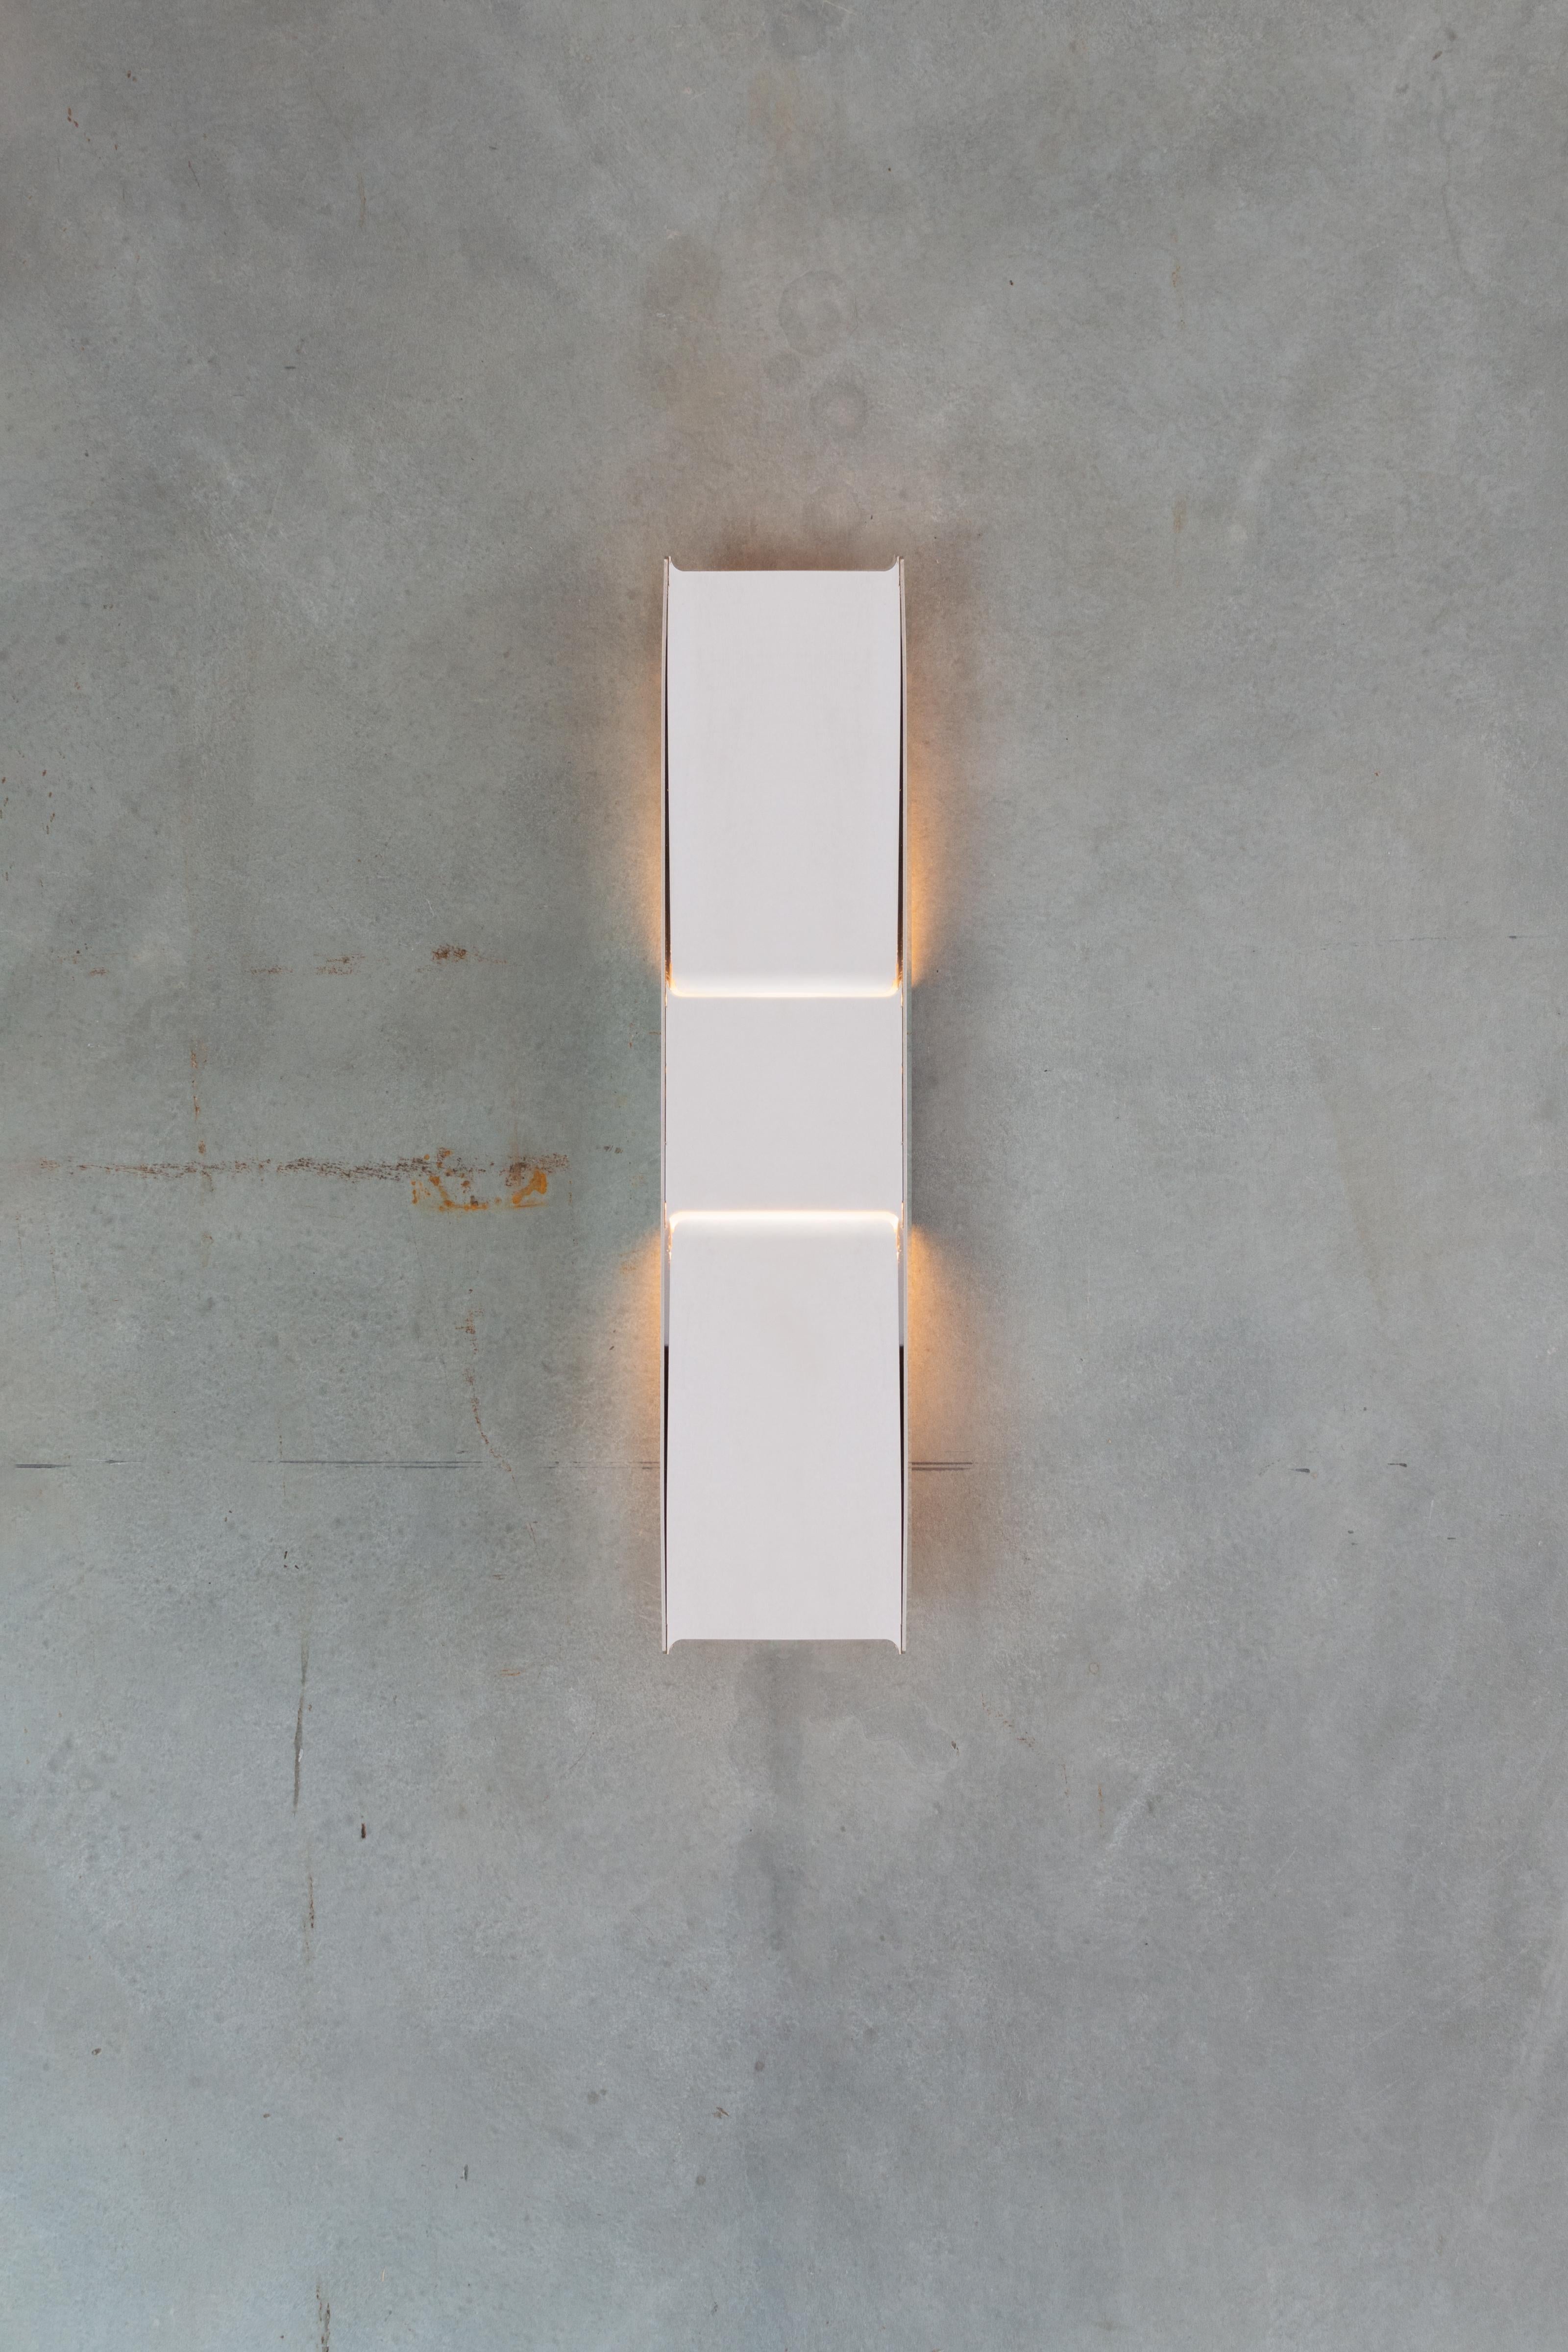 Contemporary Wall Lamp 'Vector'

Model shown: Polished Steel

DIMENSIONS
H. 58 cm x W. 12.5 x D. 5cm / H. 22.75” x W. 5” x D. 2”

ELECTRICAL
Input Voltage: 110–120V, 220–240V, 110–277V  

Power Supply: Phase dimming, 0–10V, DALI

UL Listed